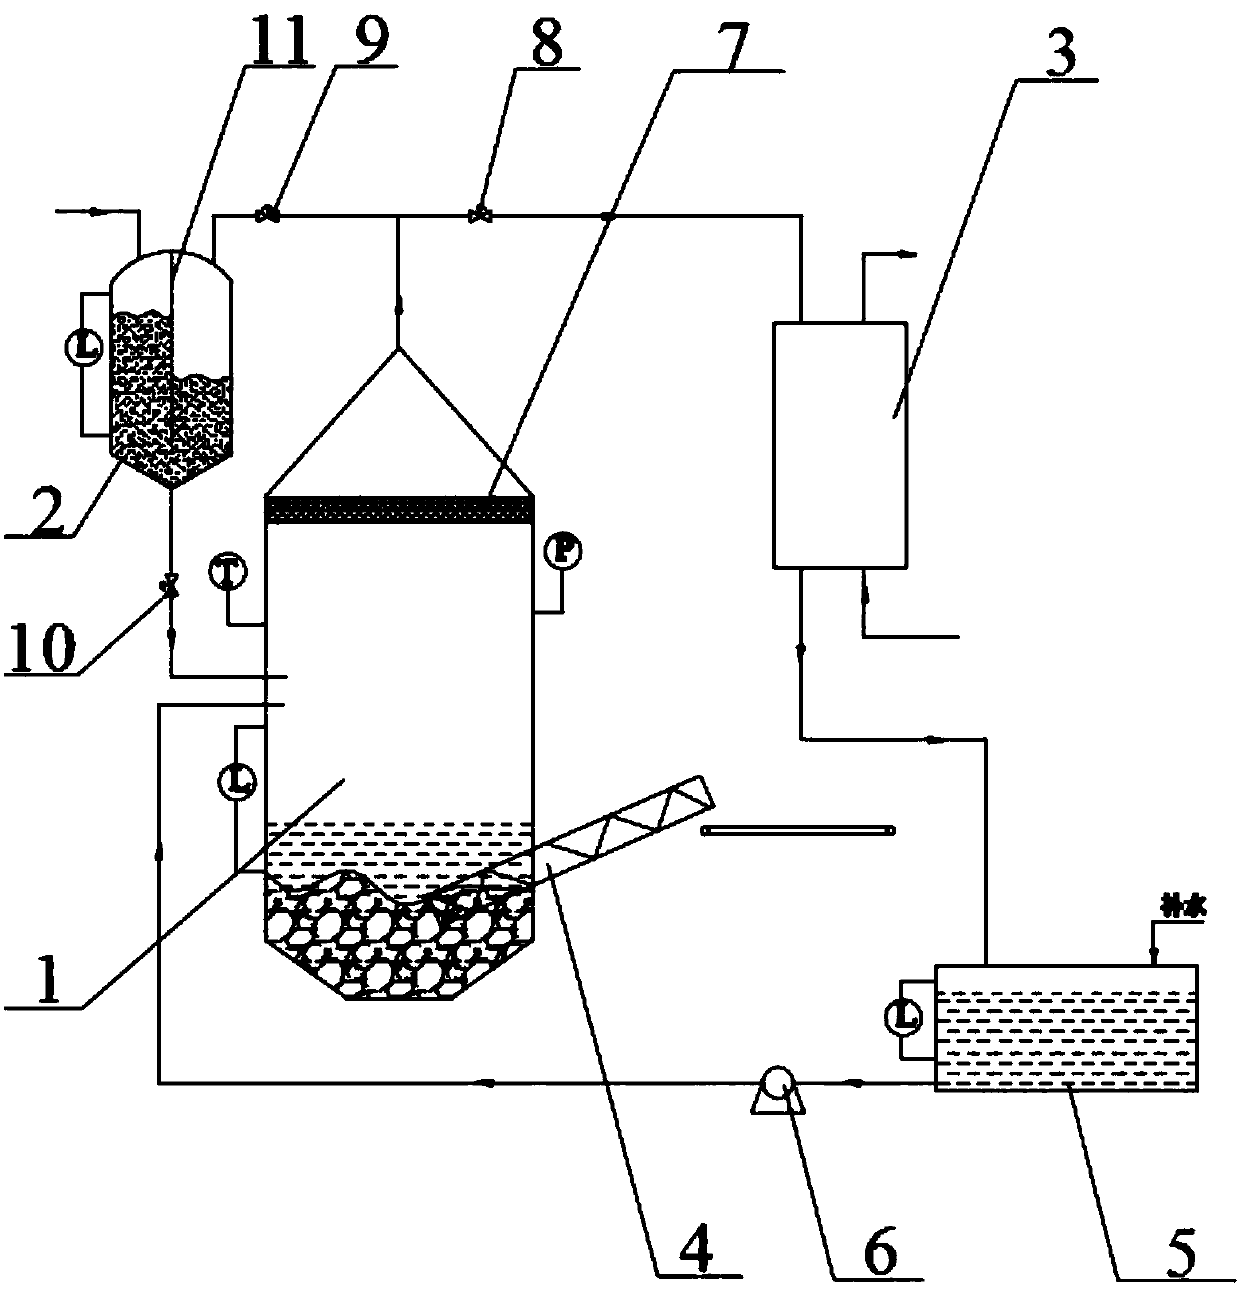 System and method for generating steam from blast furnace slag